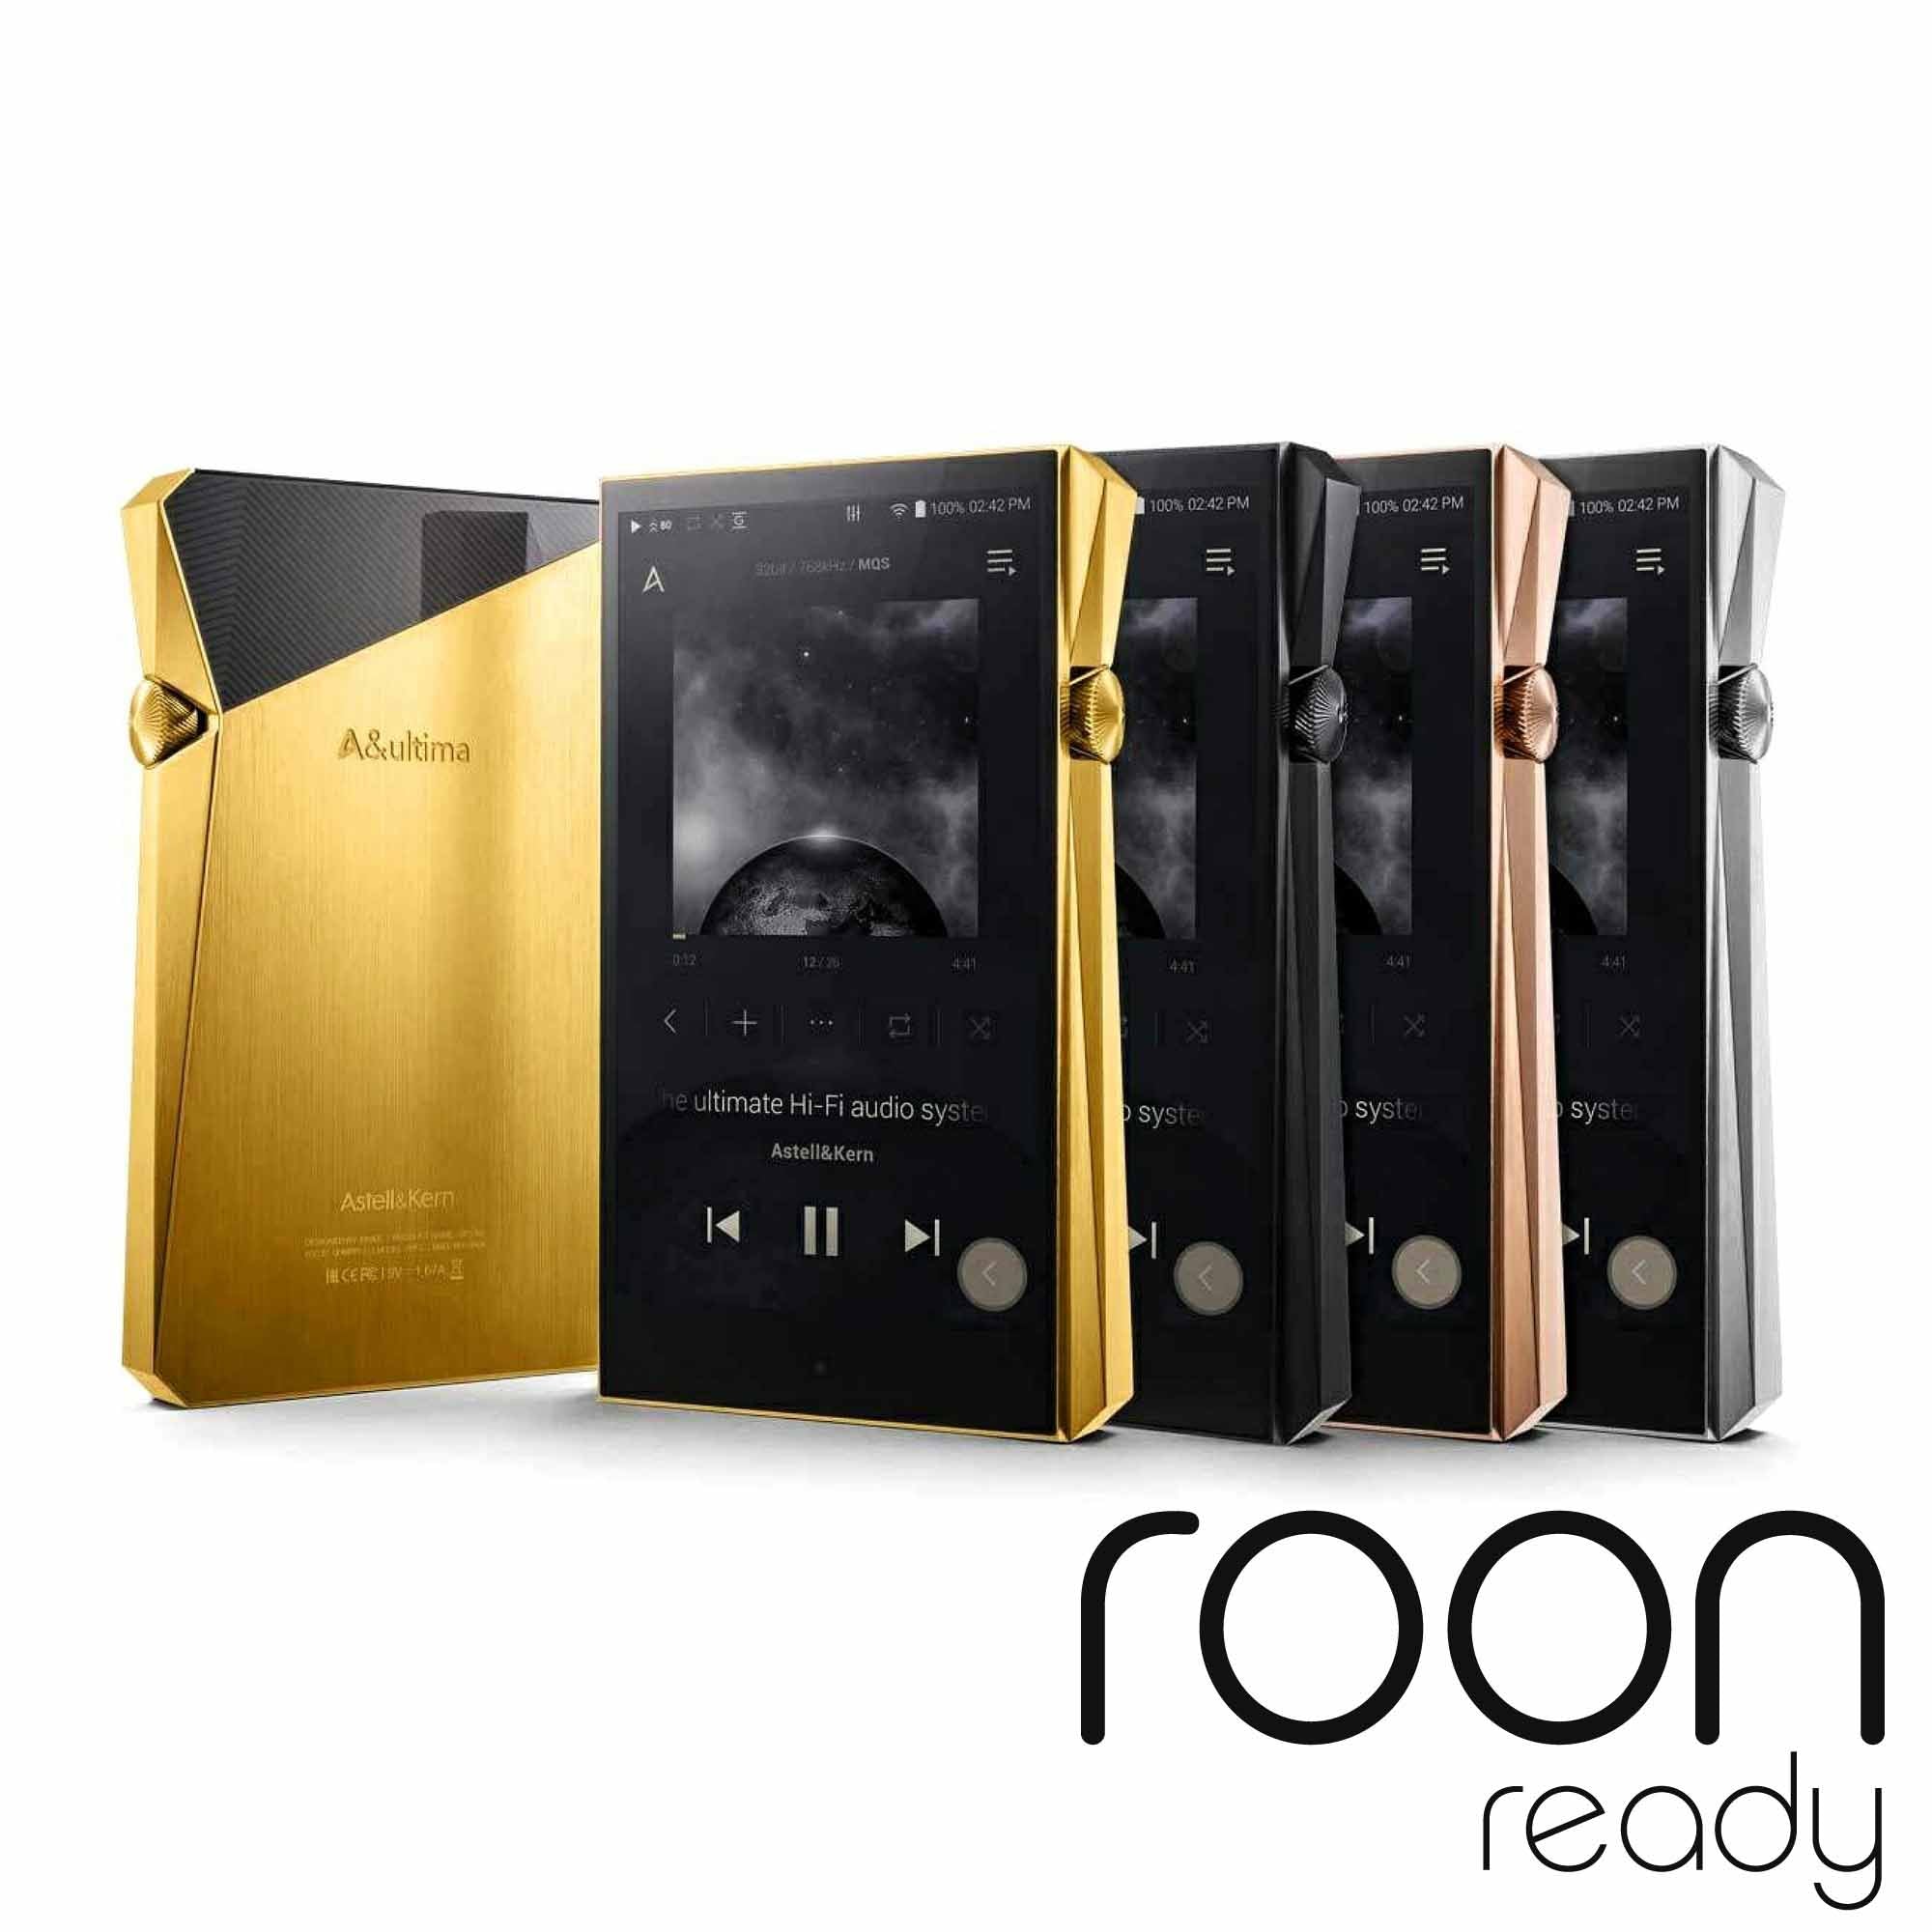 Astell&Kern SP2000, SP1000 - Now Roon Ready!